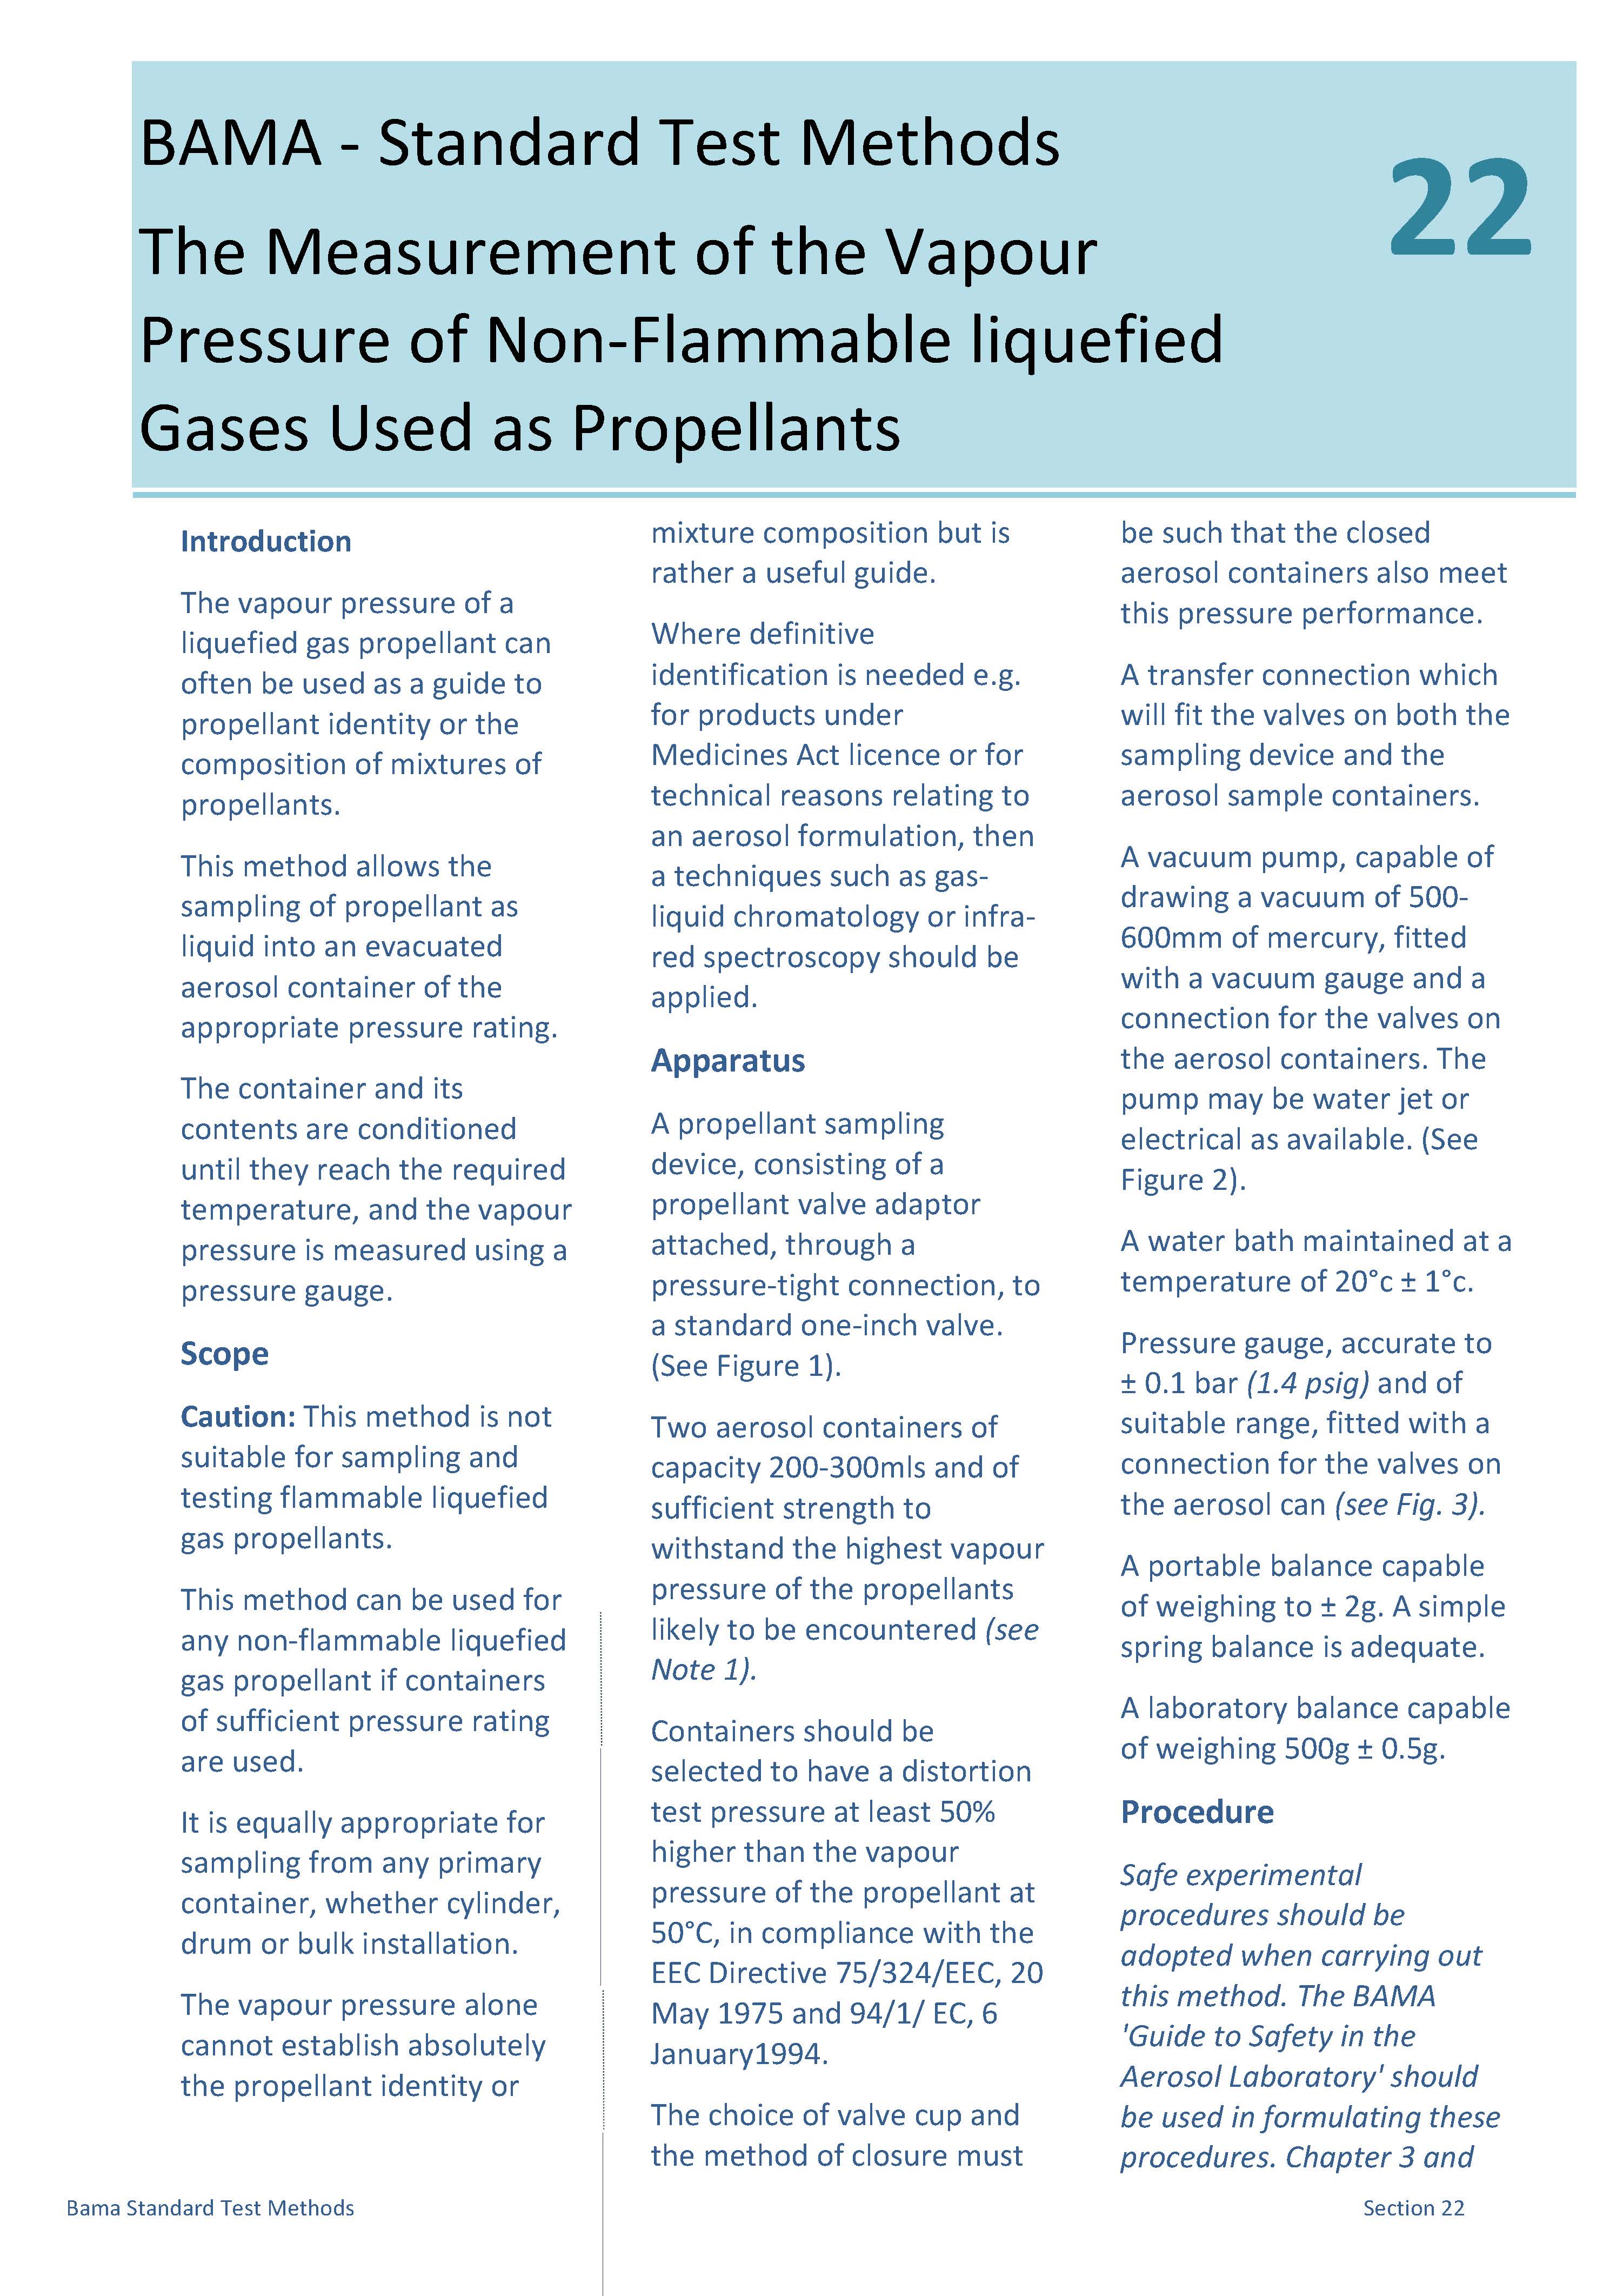 22 - The Measurement of Vapour Pressure of Non-Flammable Liquified Gases Used as Propellants